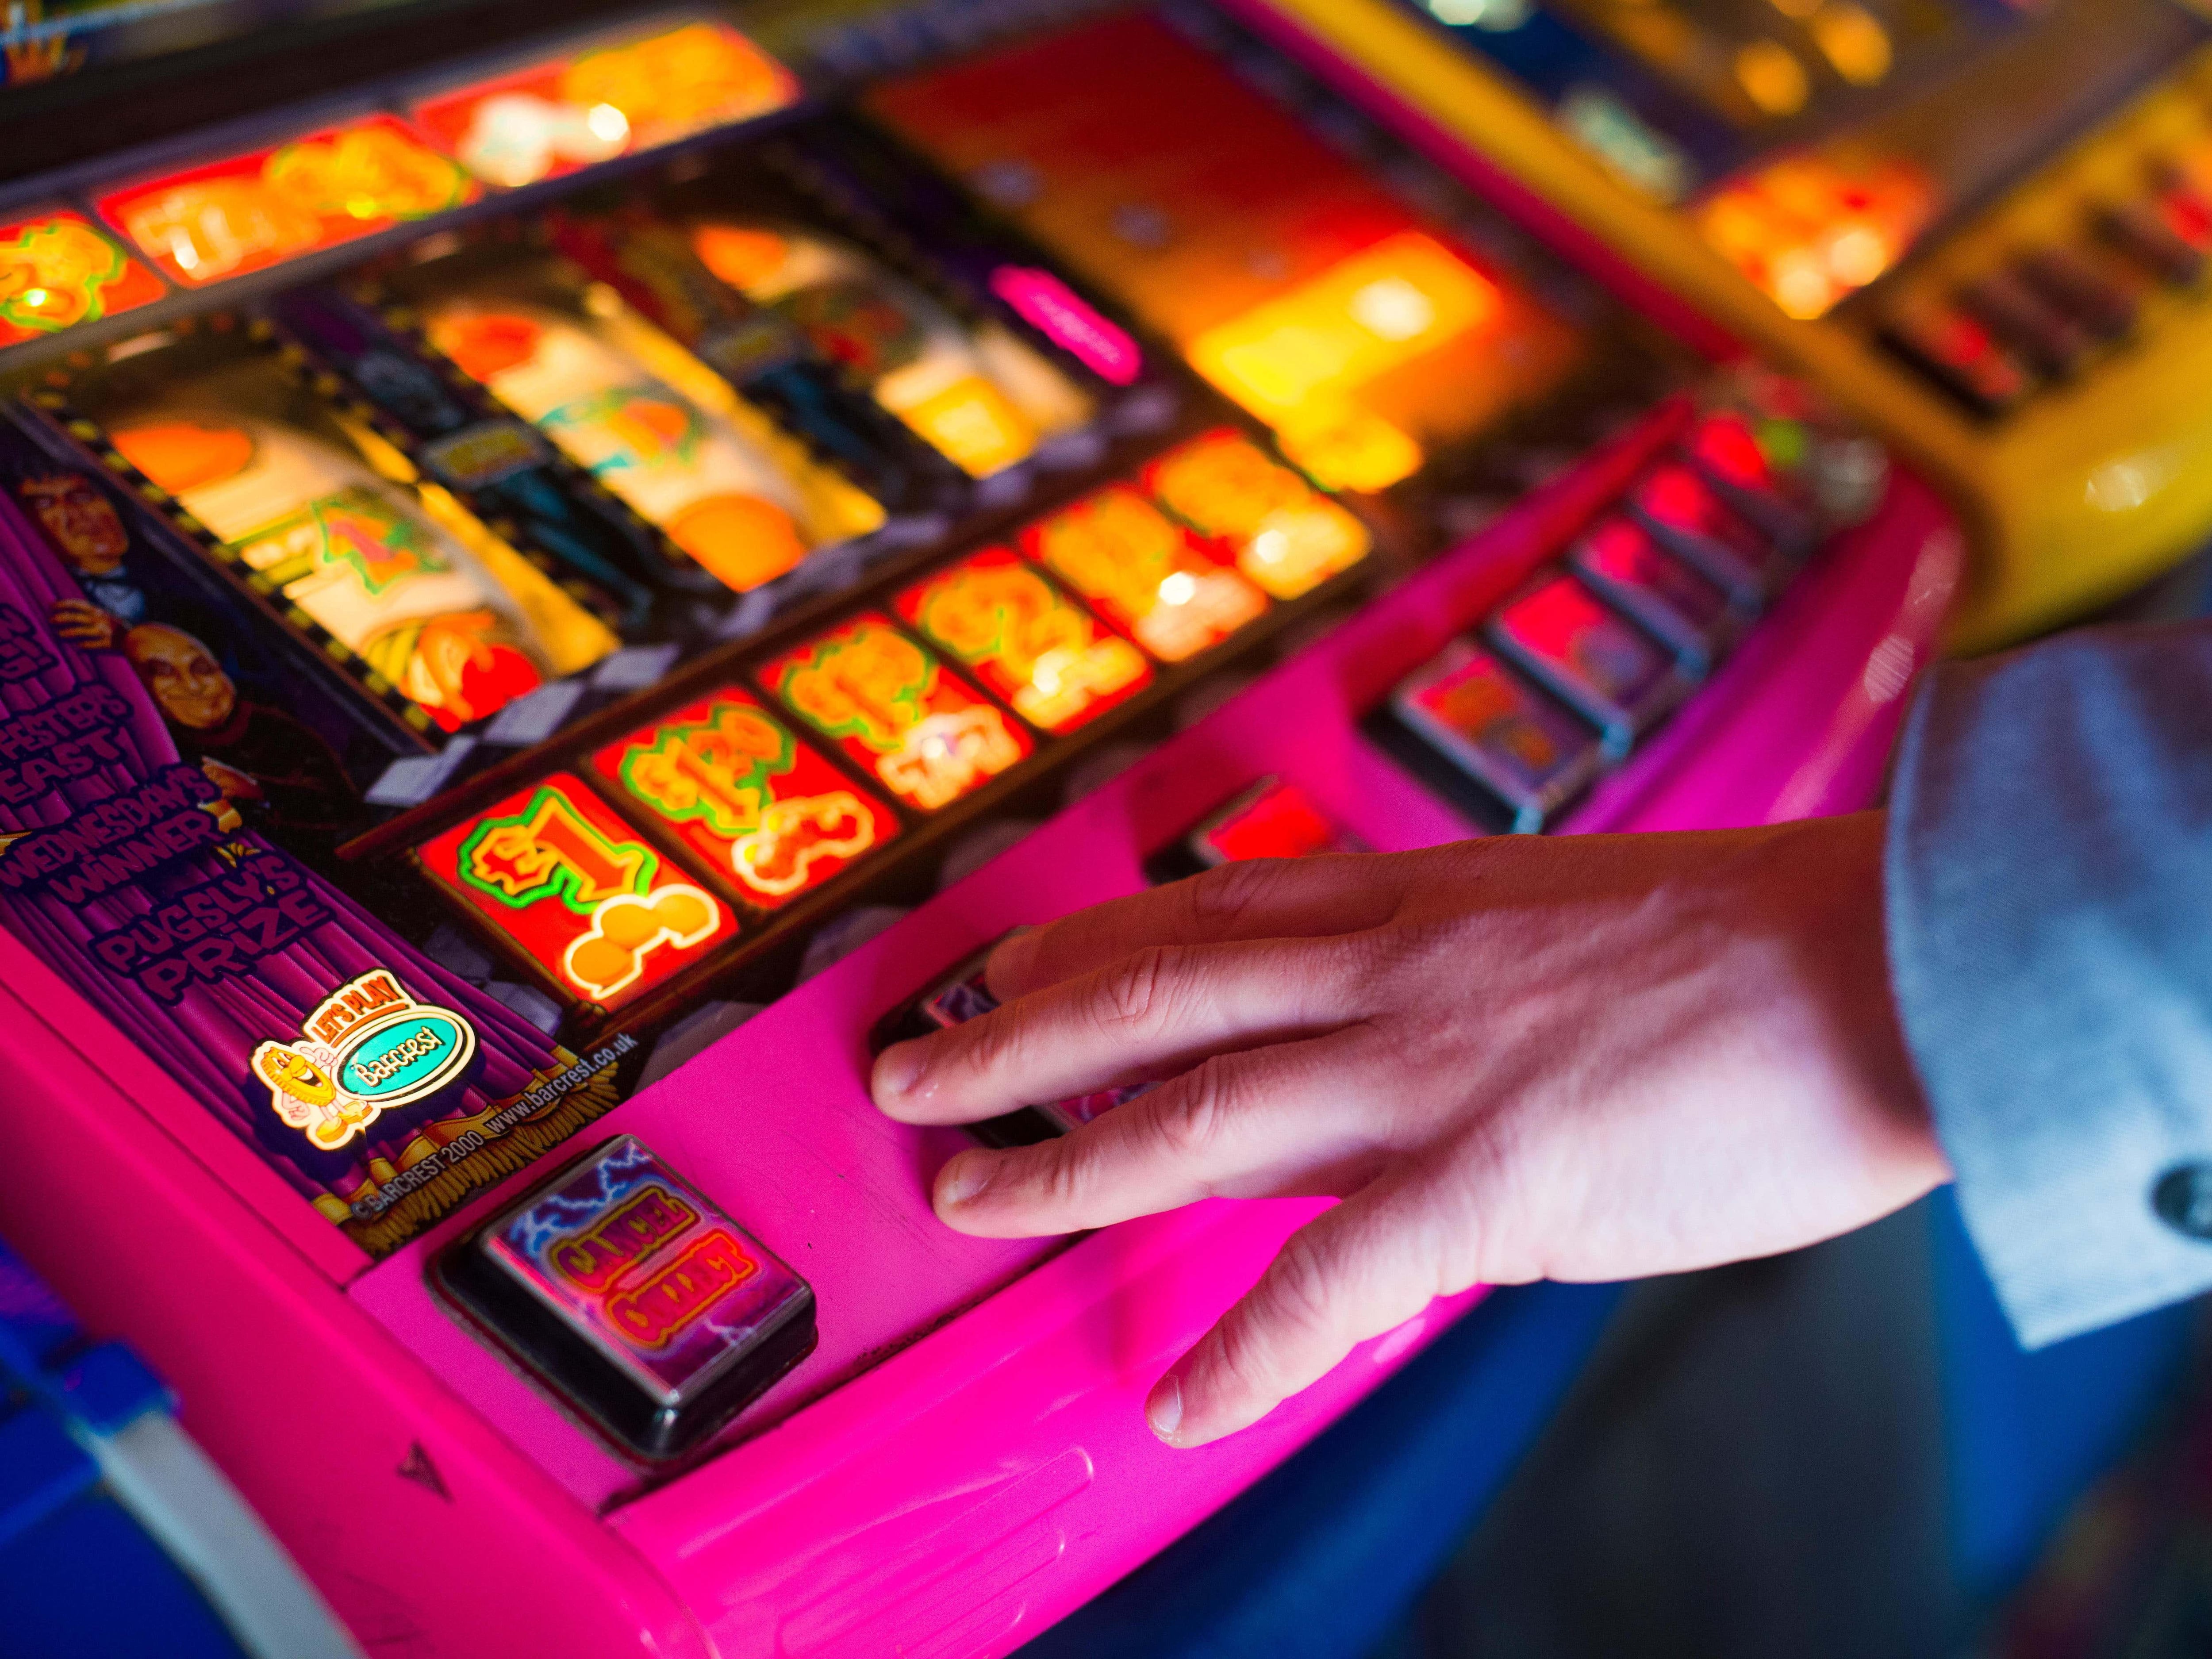 Some 2.5% of the adult population may be experiencing problem gambling – survey